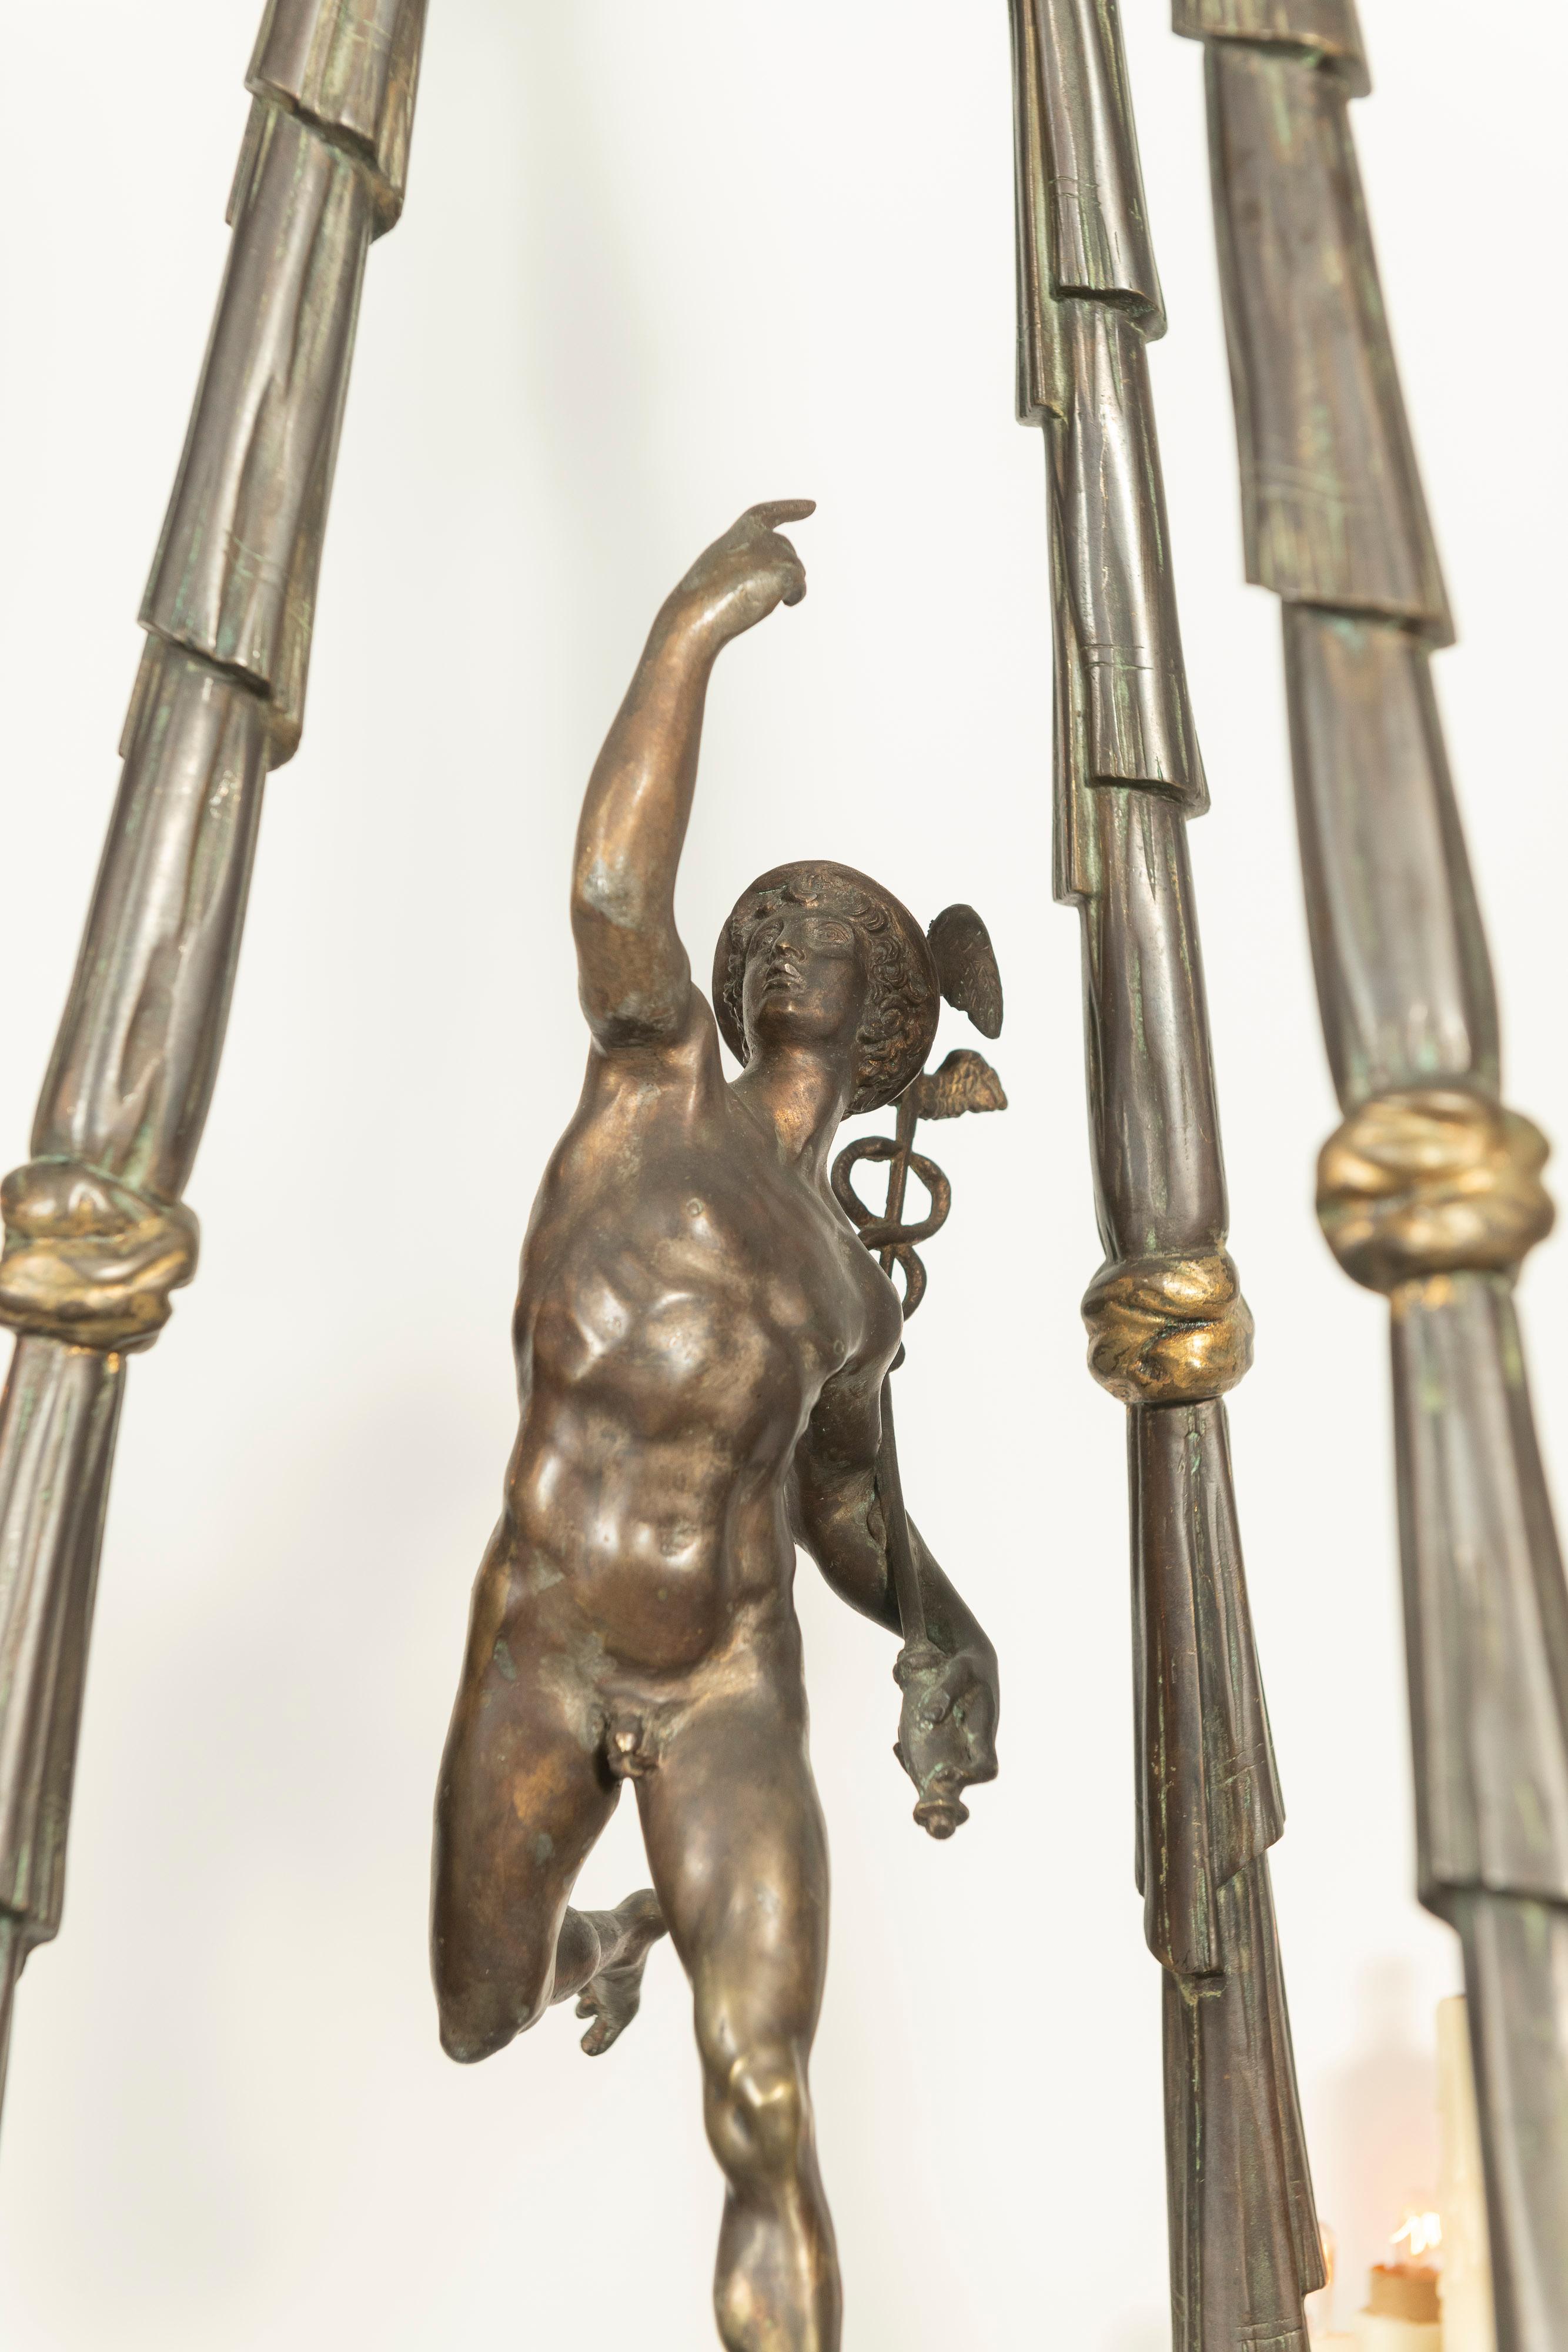 This beautifully crafted chandelier of patinated bronze is truly magnificent. With it's detailed figure of Mercury, bronze garlands, cherubs and gazelles,  the three arms each hold five candle-like bulbs. The fixture is heavy in weight and style and